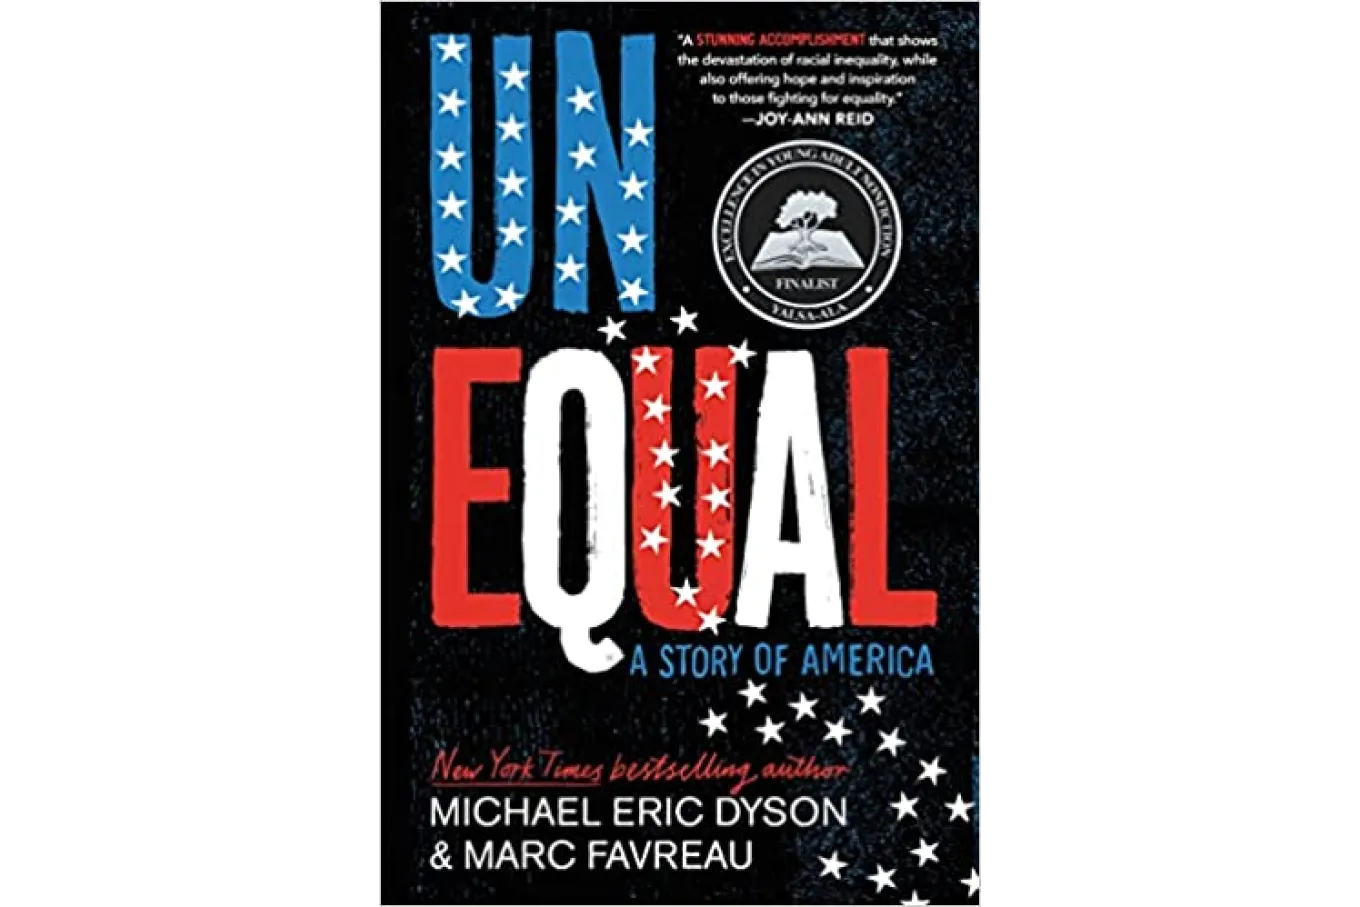 Unequal: A Story of America